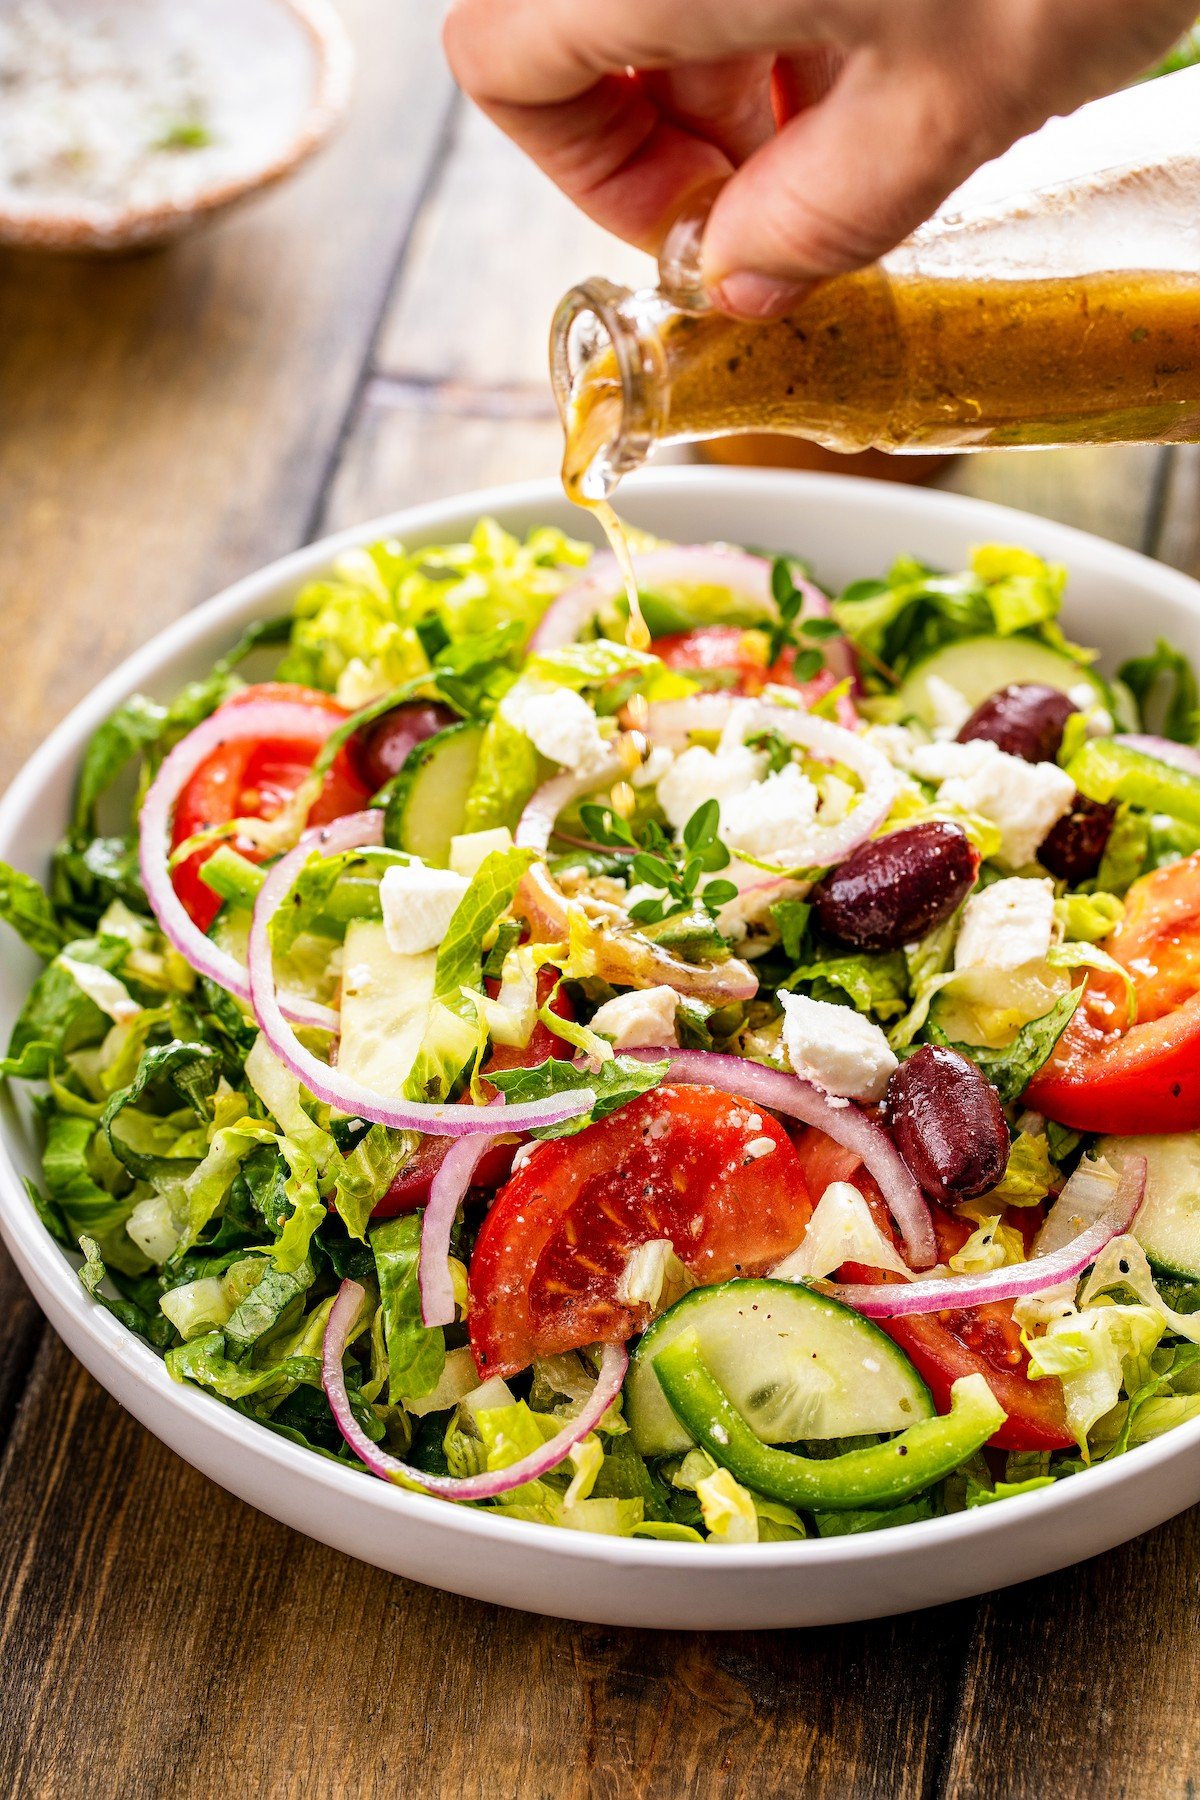 Dressing poured over lettuce, red onion, tomatoes, feta cheese, and more.